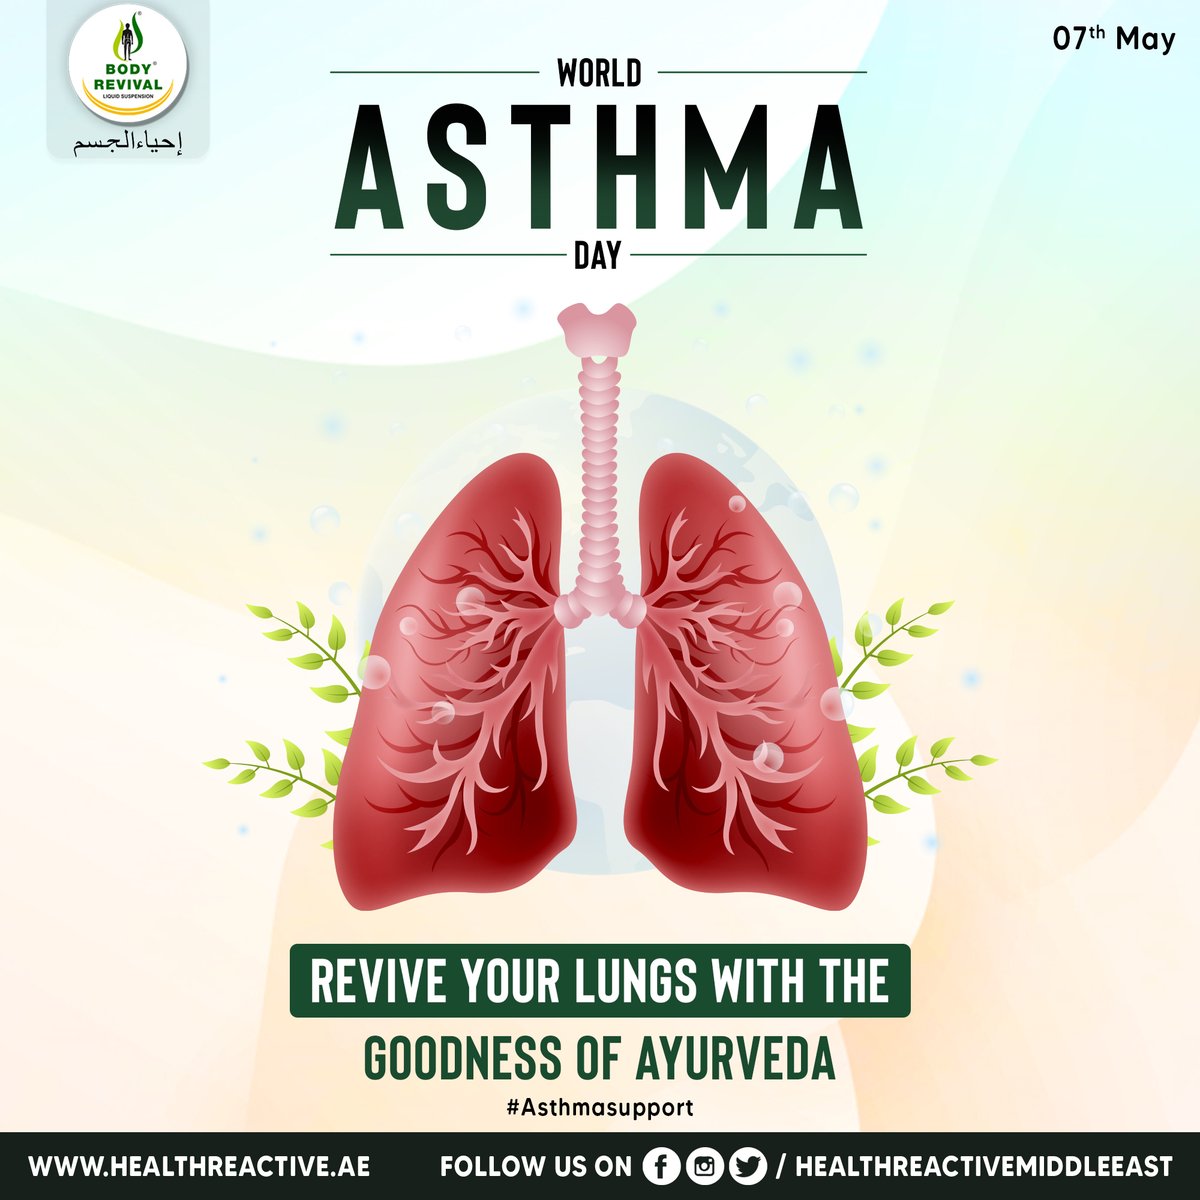 Join us in raising awareness this World Asthma Day. Let's unite to support those living with asthma, promote education, and advocate for better treatment options.
Together, we can breathe easier.

For More Follow Us
healthreactive.ae

#worldasthmaday #immunebooster